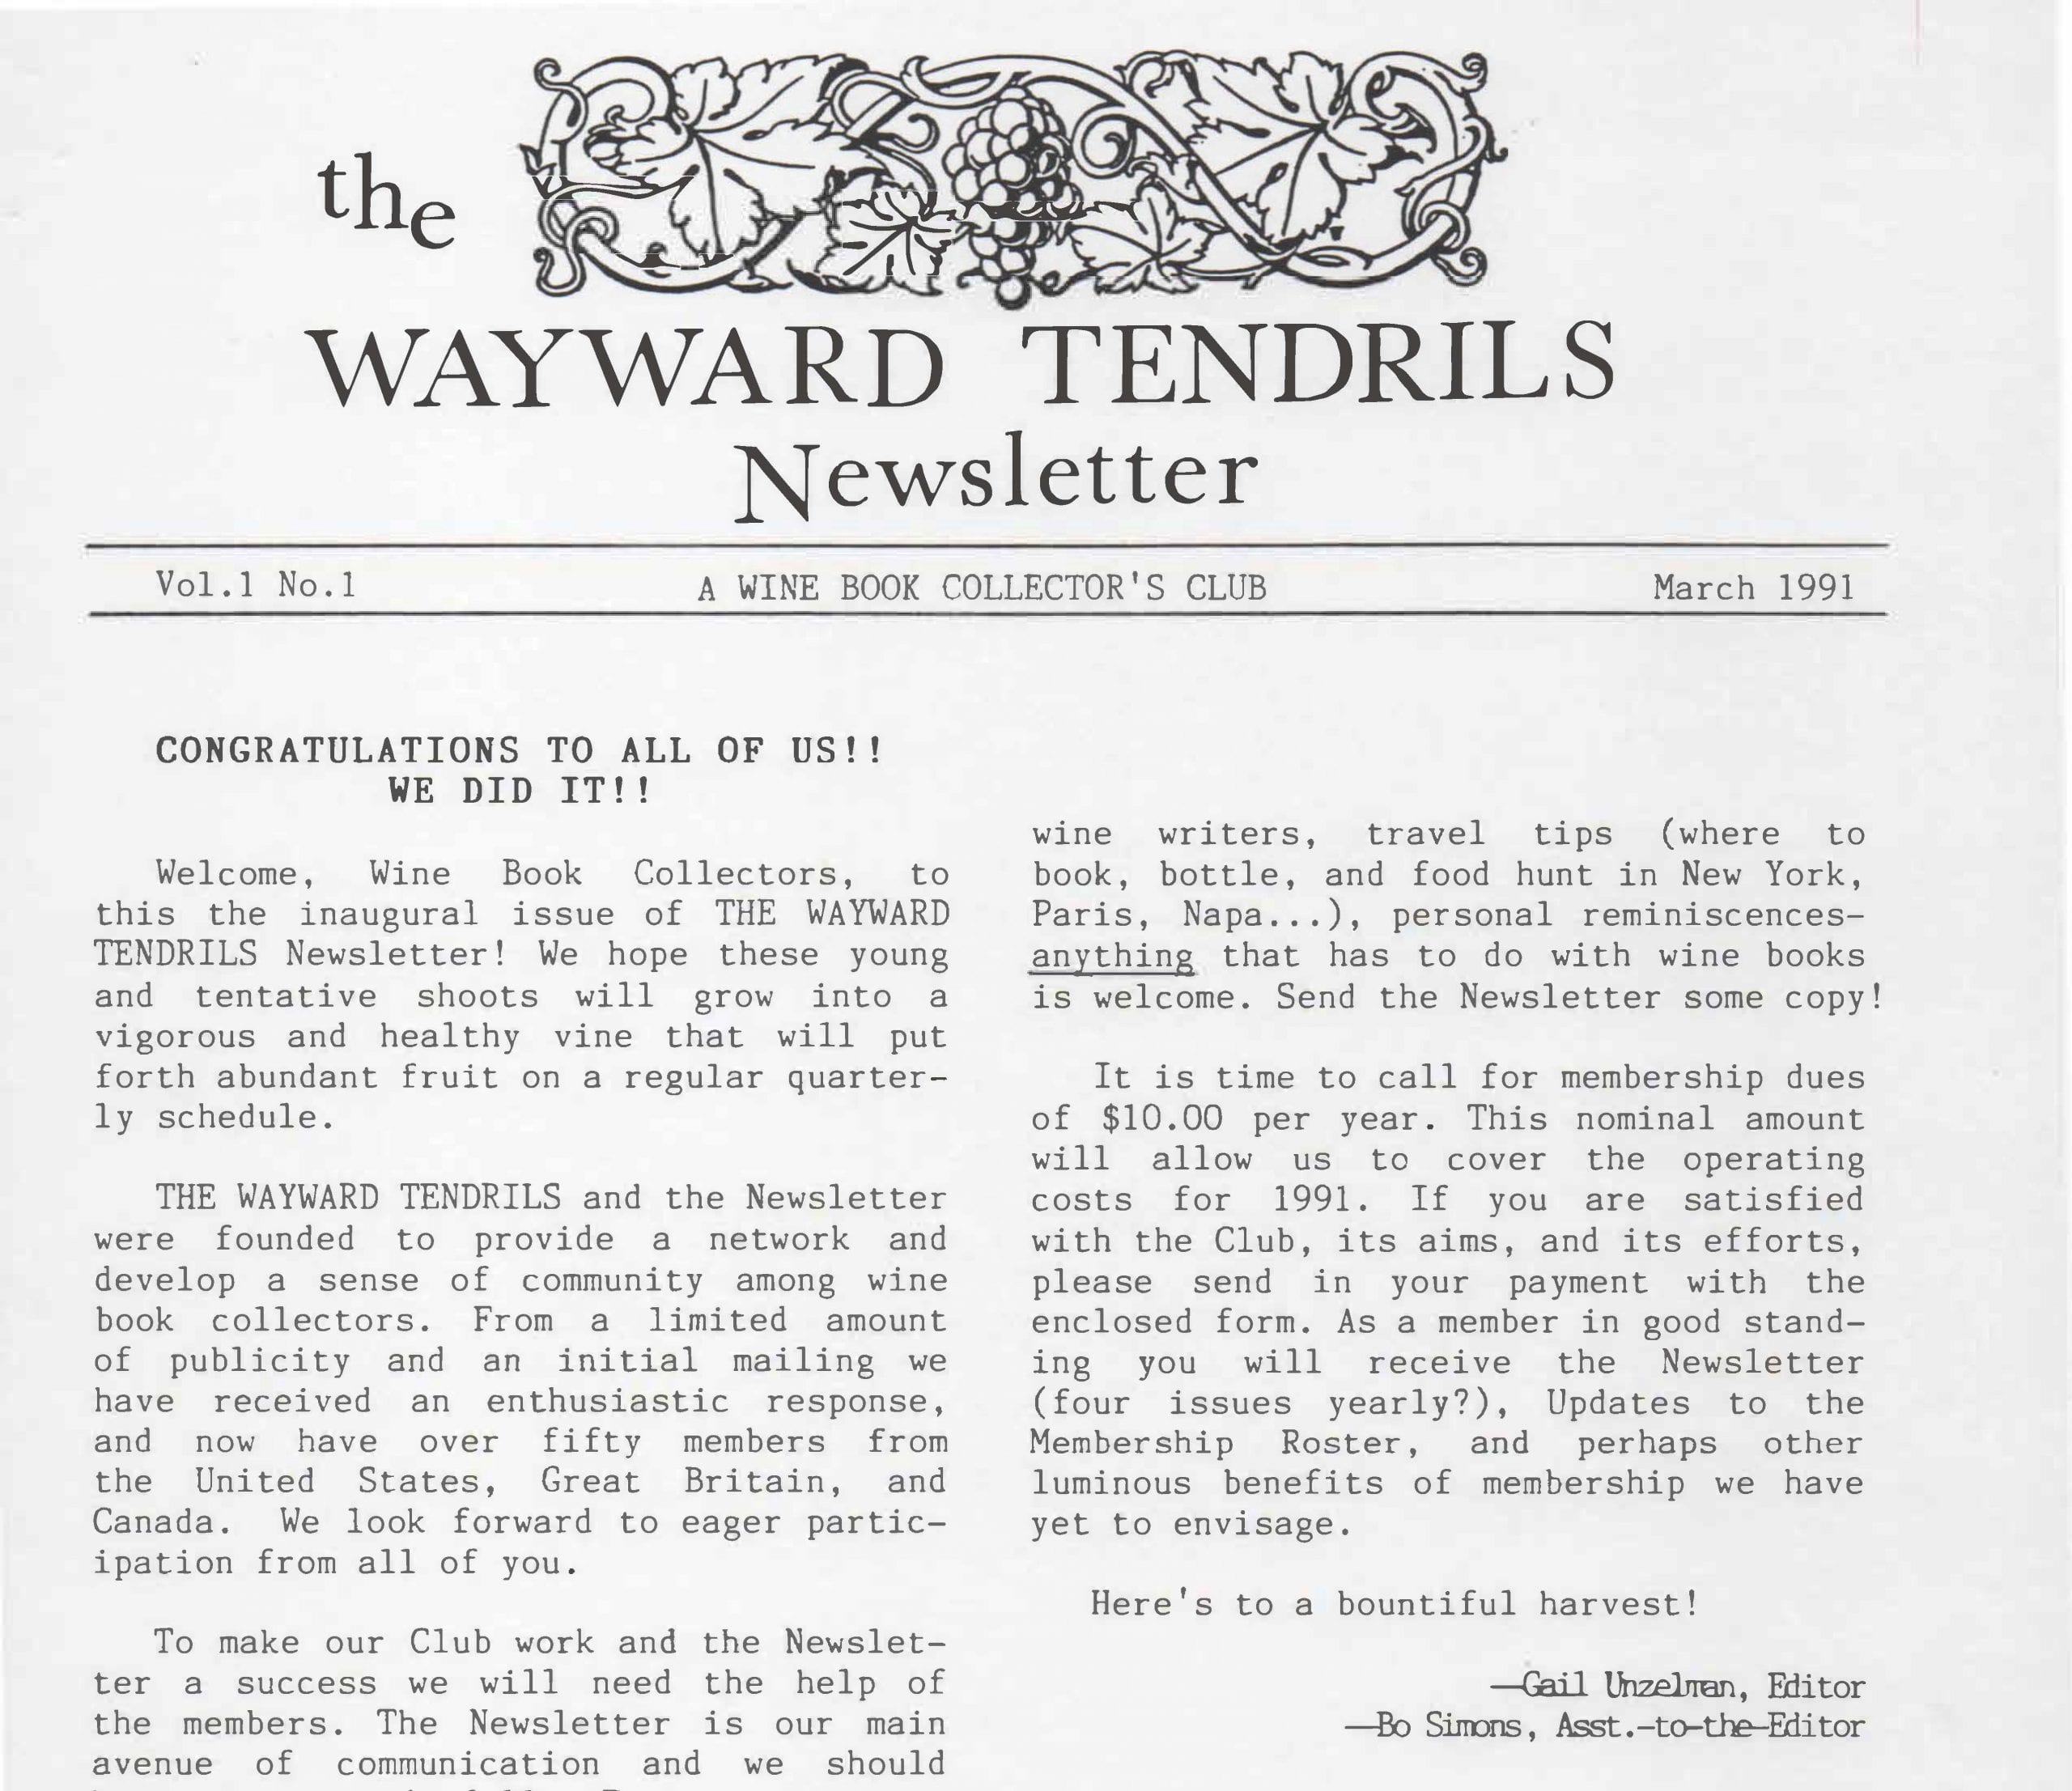 The first Wayward Tendrils Newsletter, March 1991